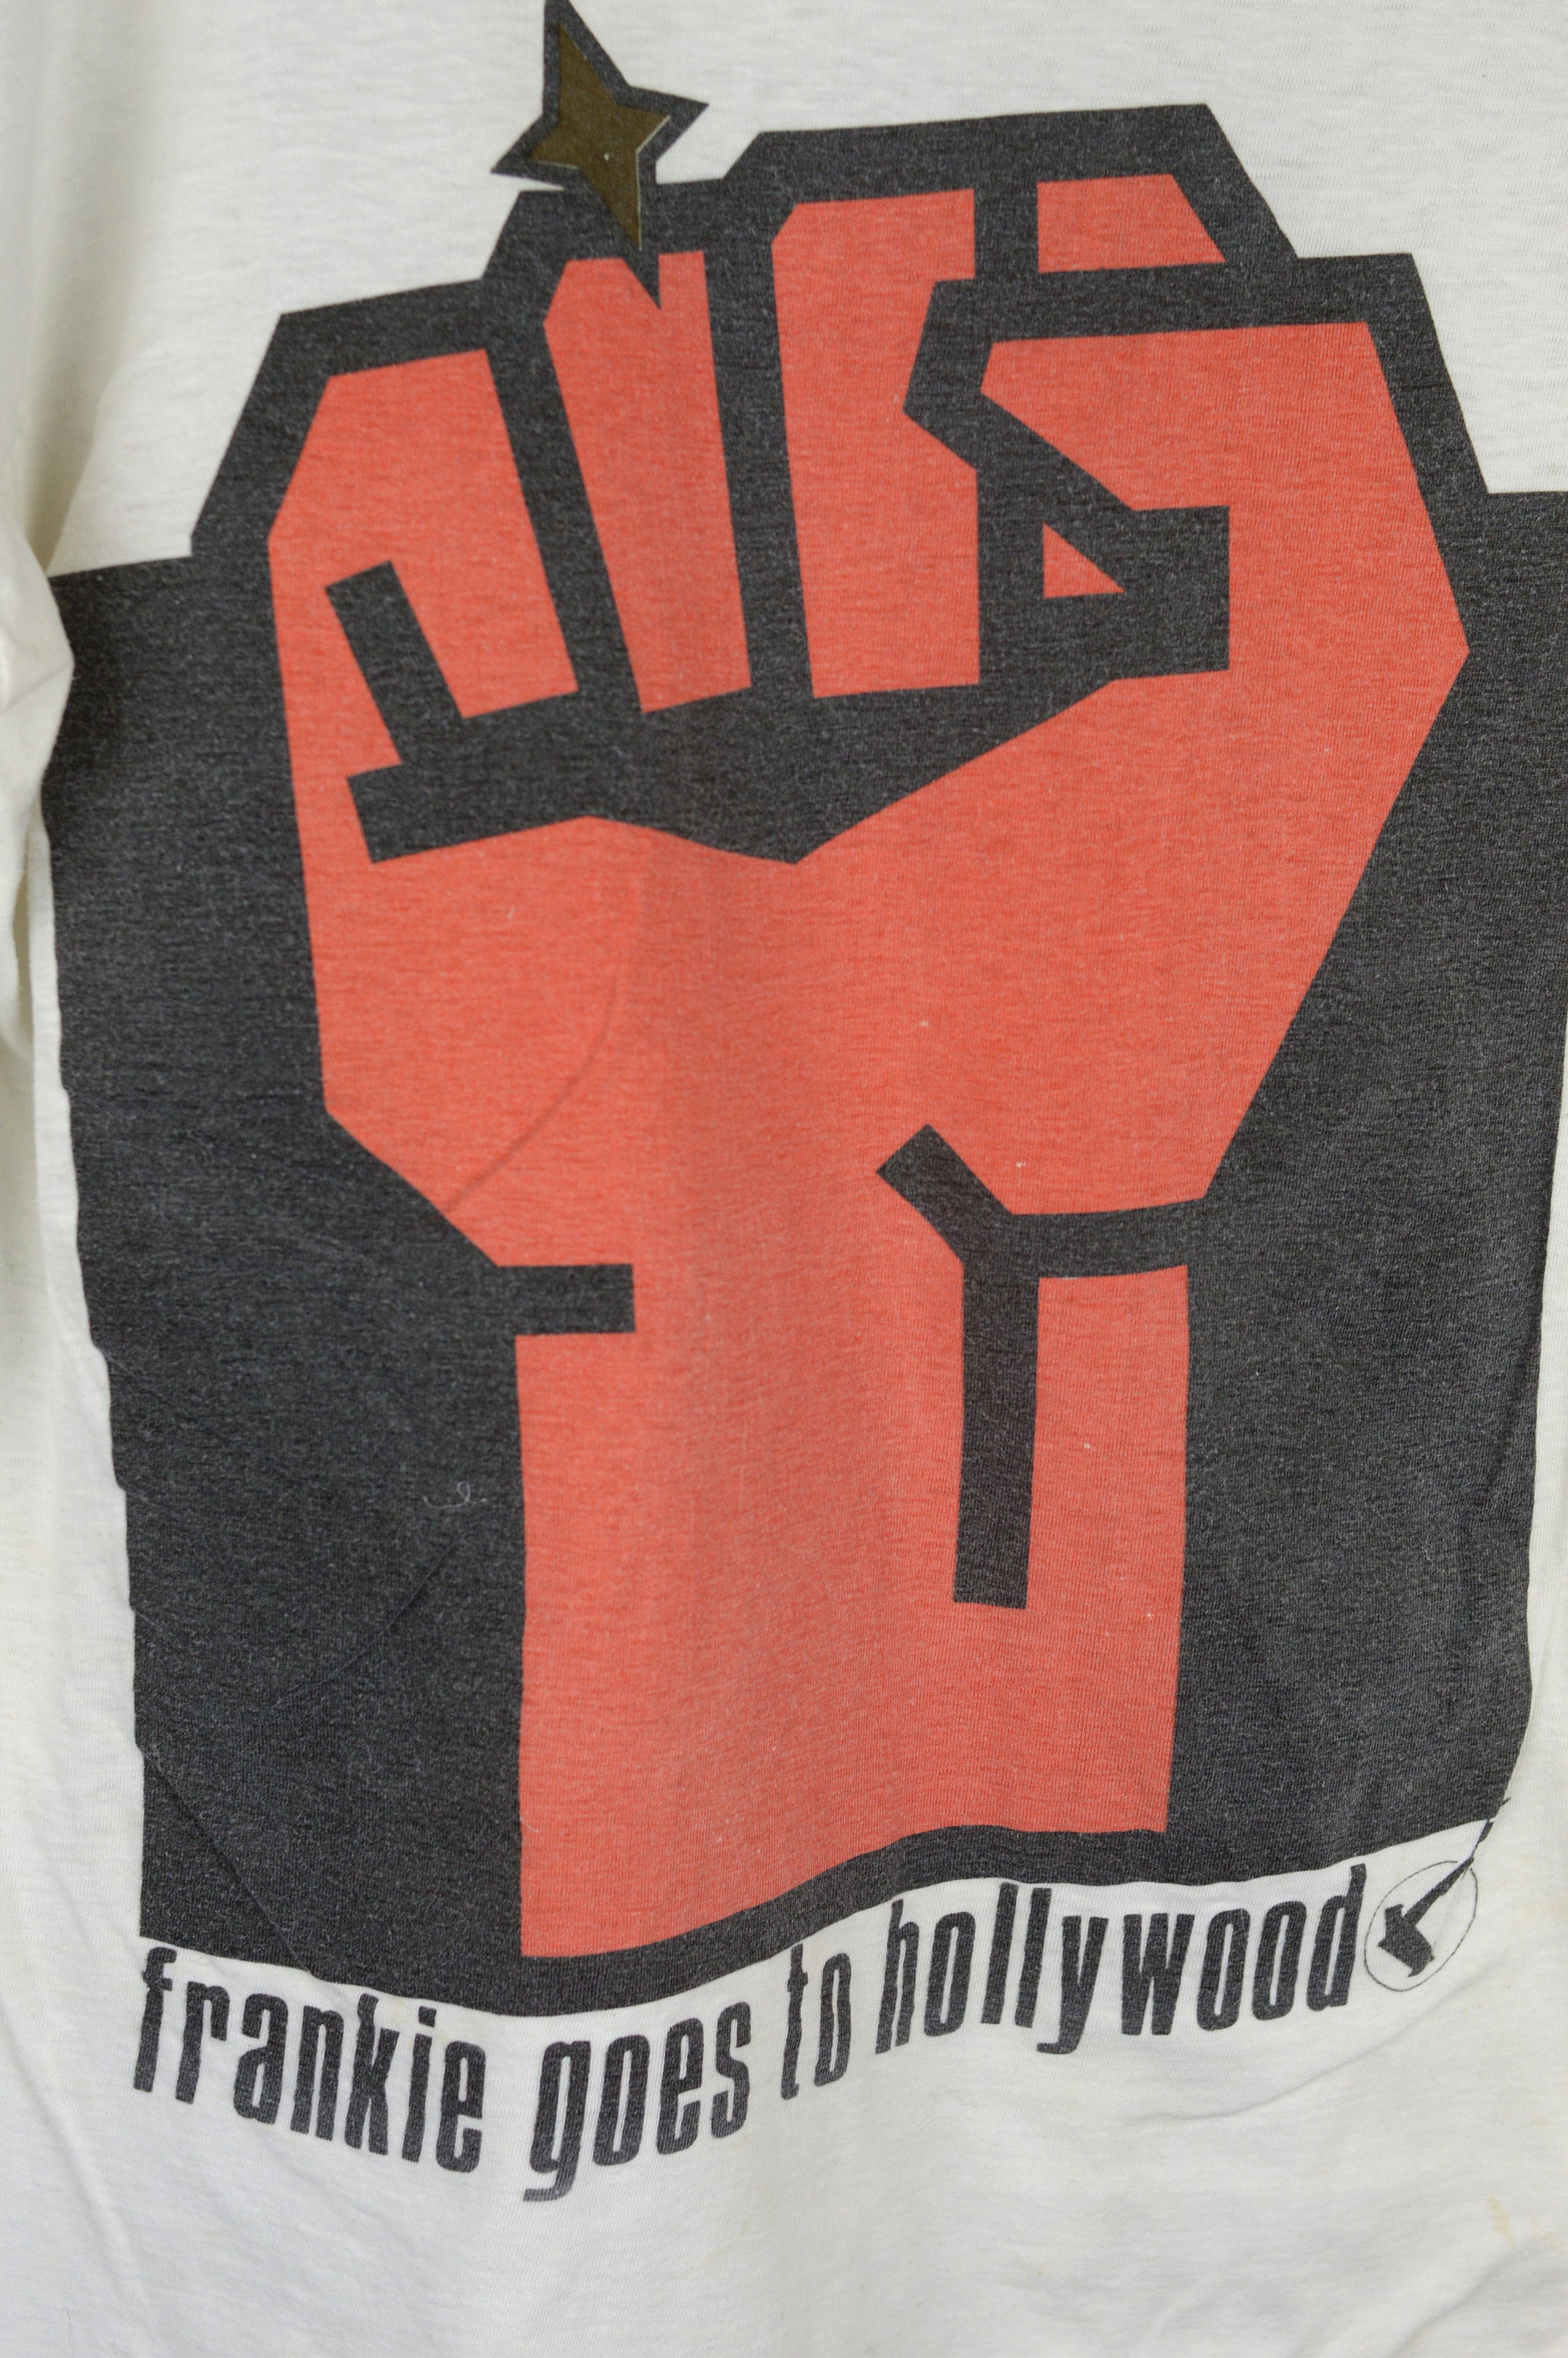 Vintage Frankie Goes to Hollywood 1986 T Shirt - Etsy